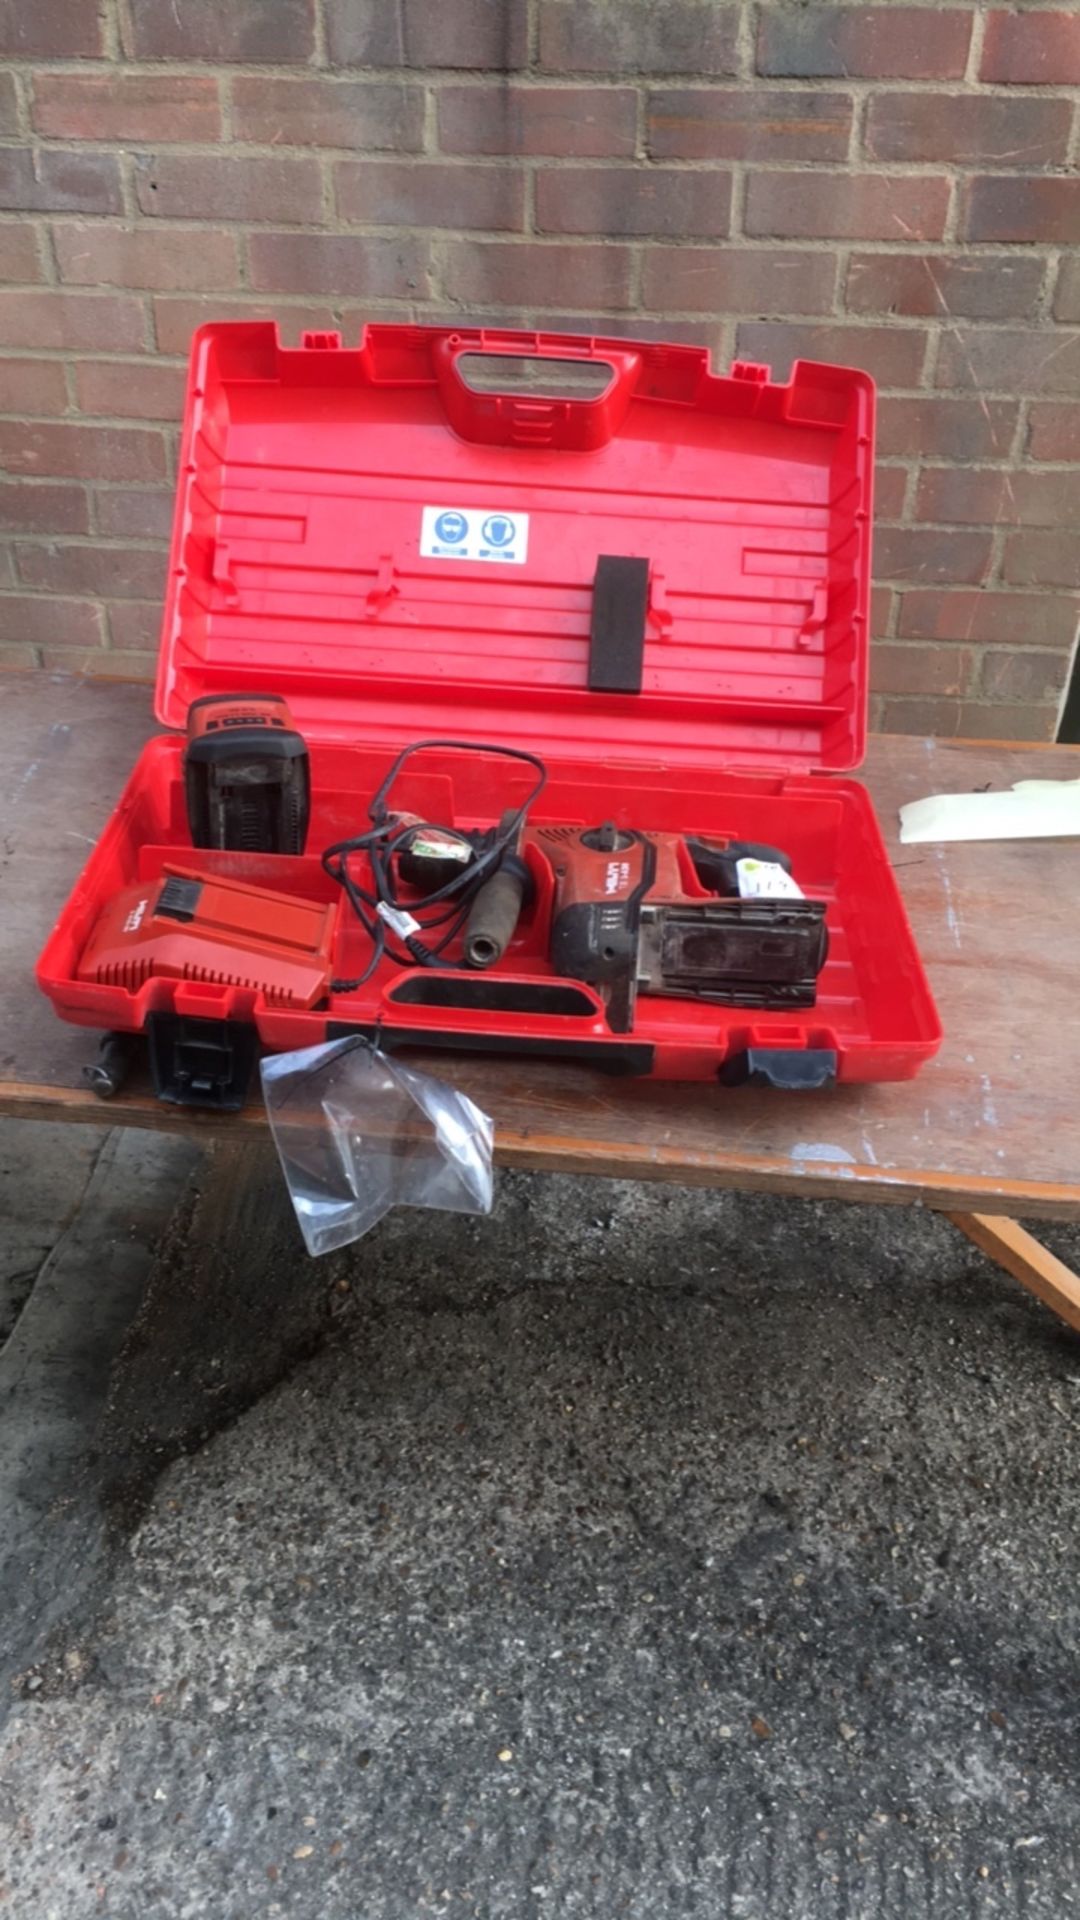 Hilti TE6-A AVR battery hammer drill - Image 2 of 3